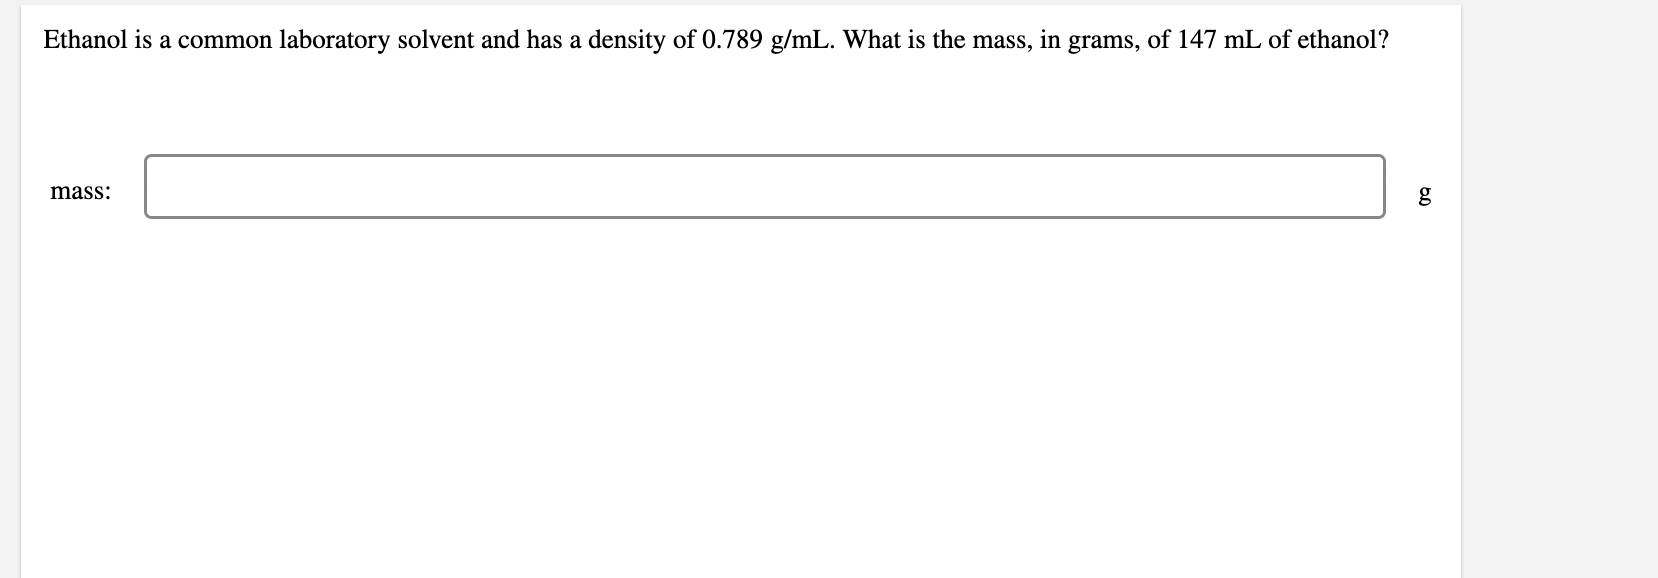 Ethanol is a common laboratory solvent and has a density of \( 0.789 \mathrm{~g} / \mathrm{mL} \). What is the mass, in grams